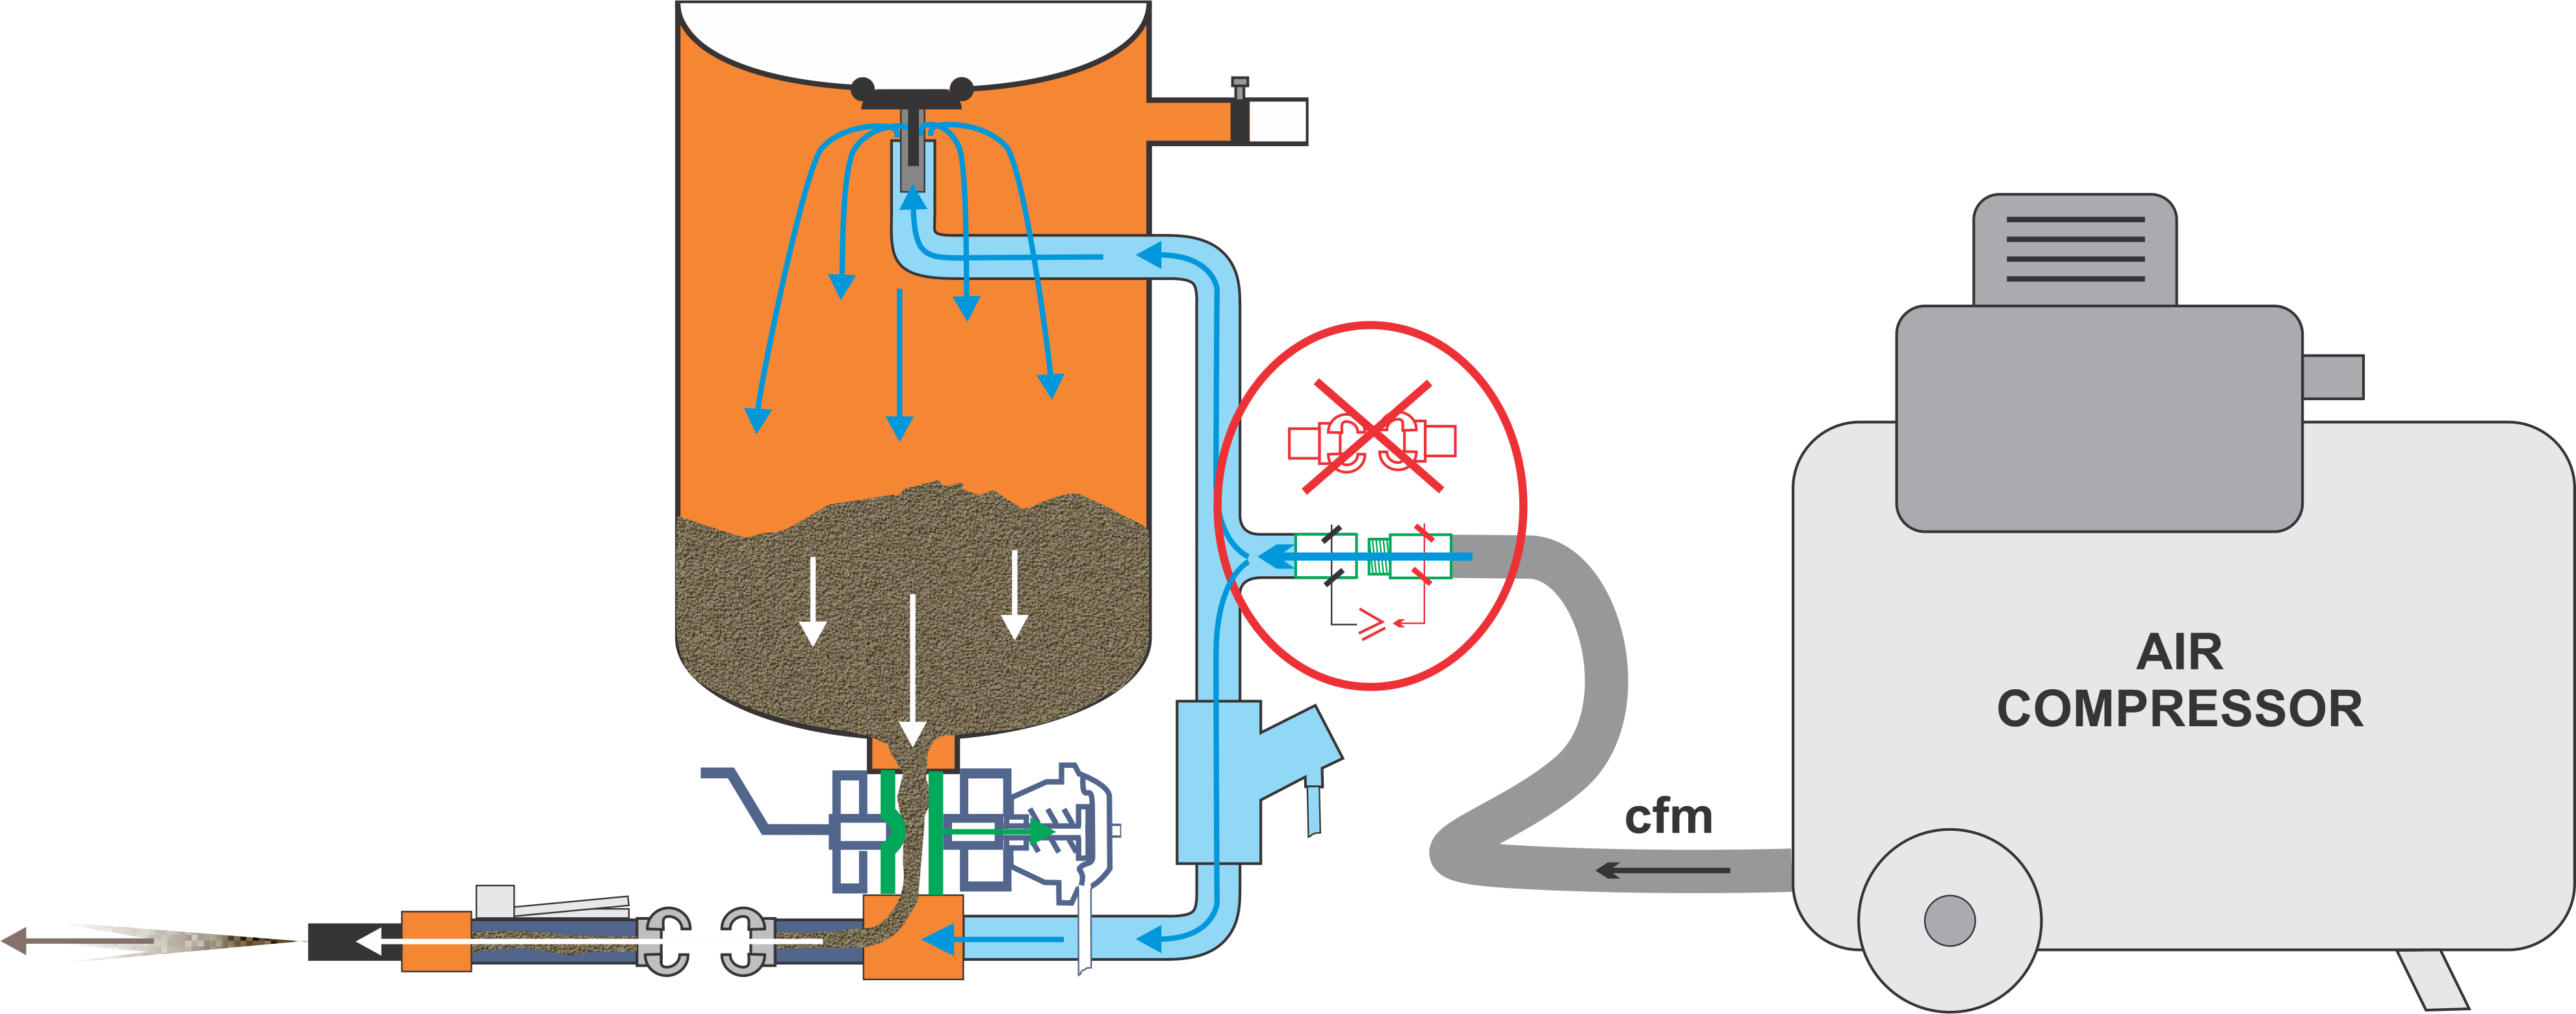 Connection Between a Pressurized Sandblaster and an Air compressor